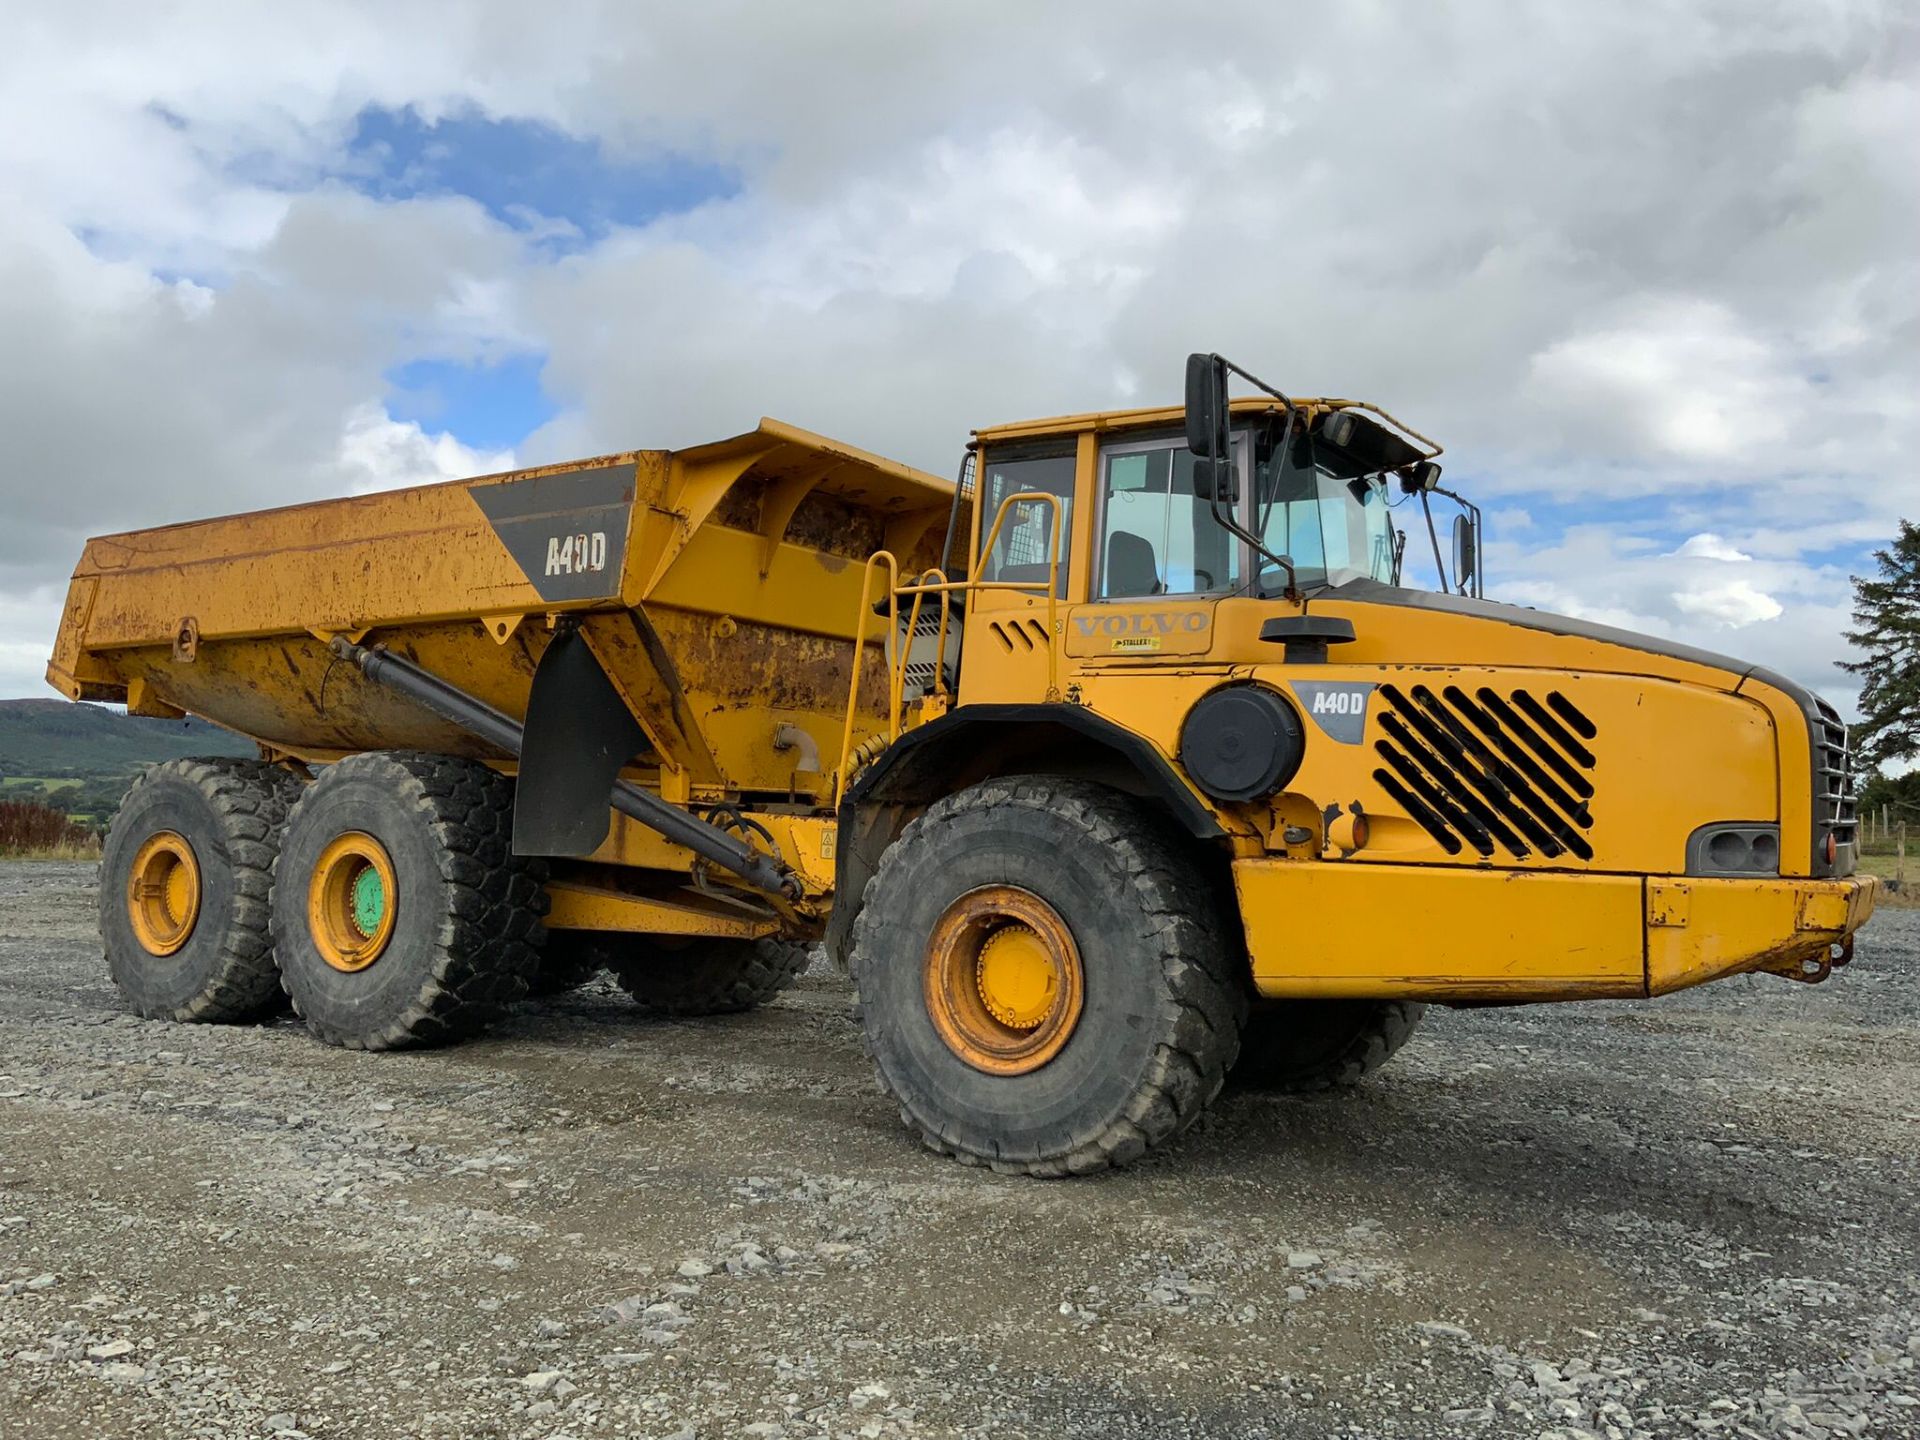 2000 VOLVO A40D ARTUCLATED DUMP TRUCK - Image 6 of 16